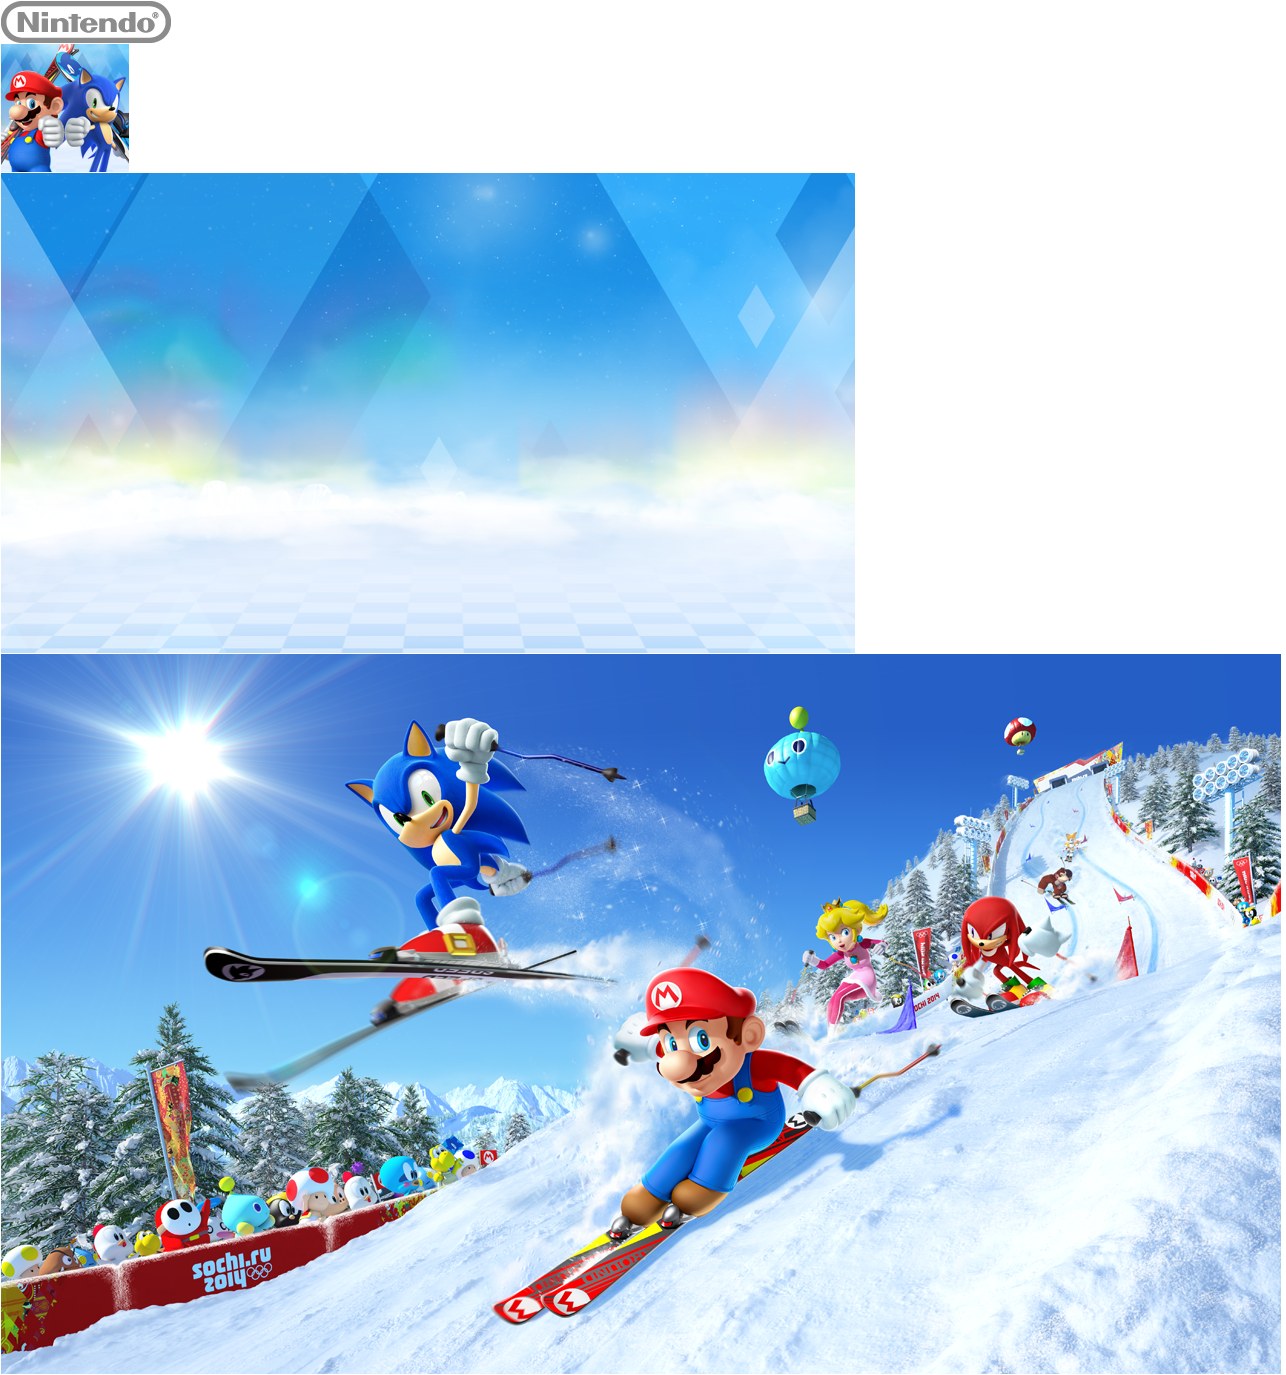 Mario & Sonic at the Sochi 2014 Olympic Winter Games - HOME Menu Icon and Banners